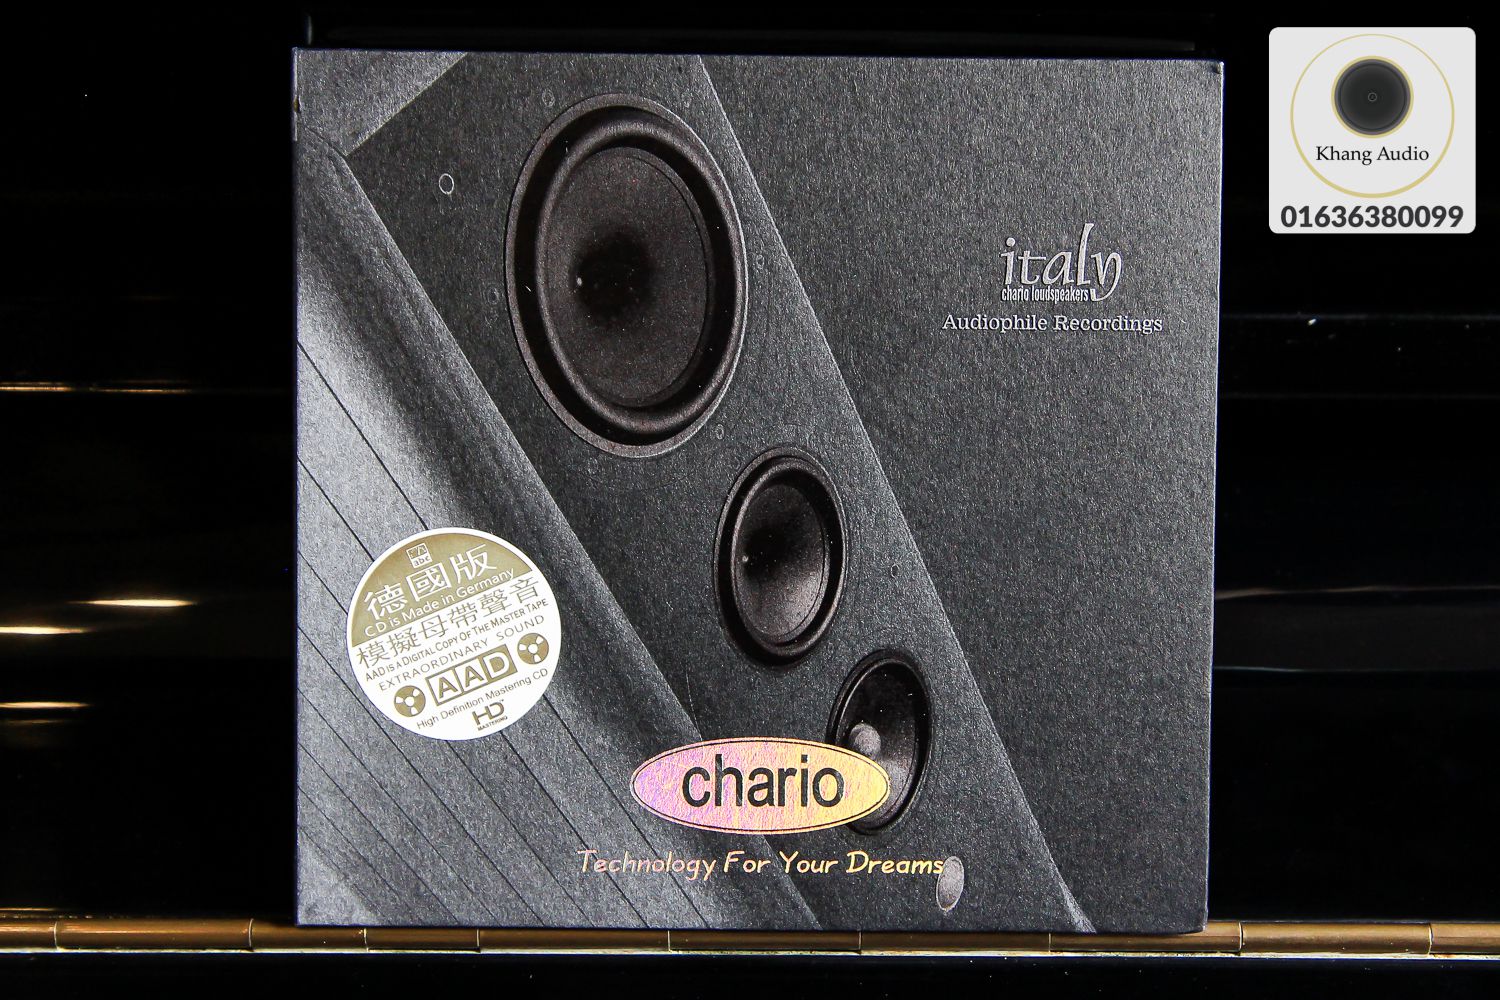 Chario - Technology For Your Dreams - Various HQ Khang Audio 0336380099